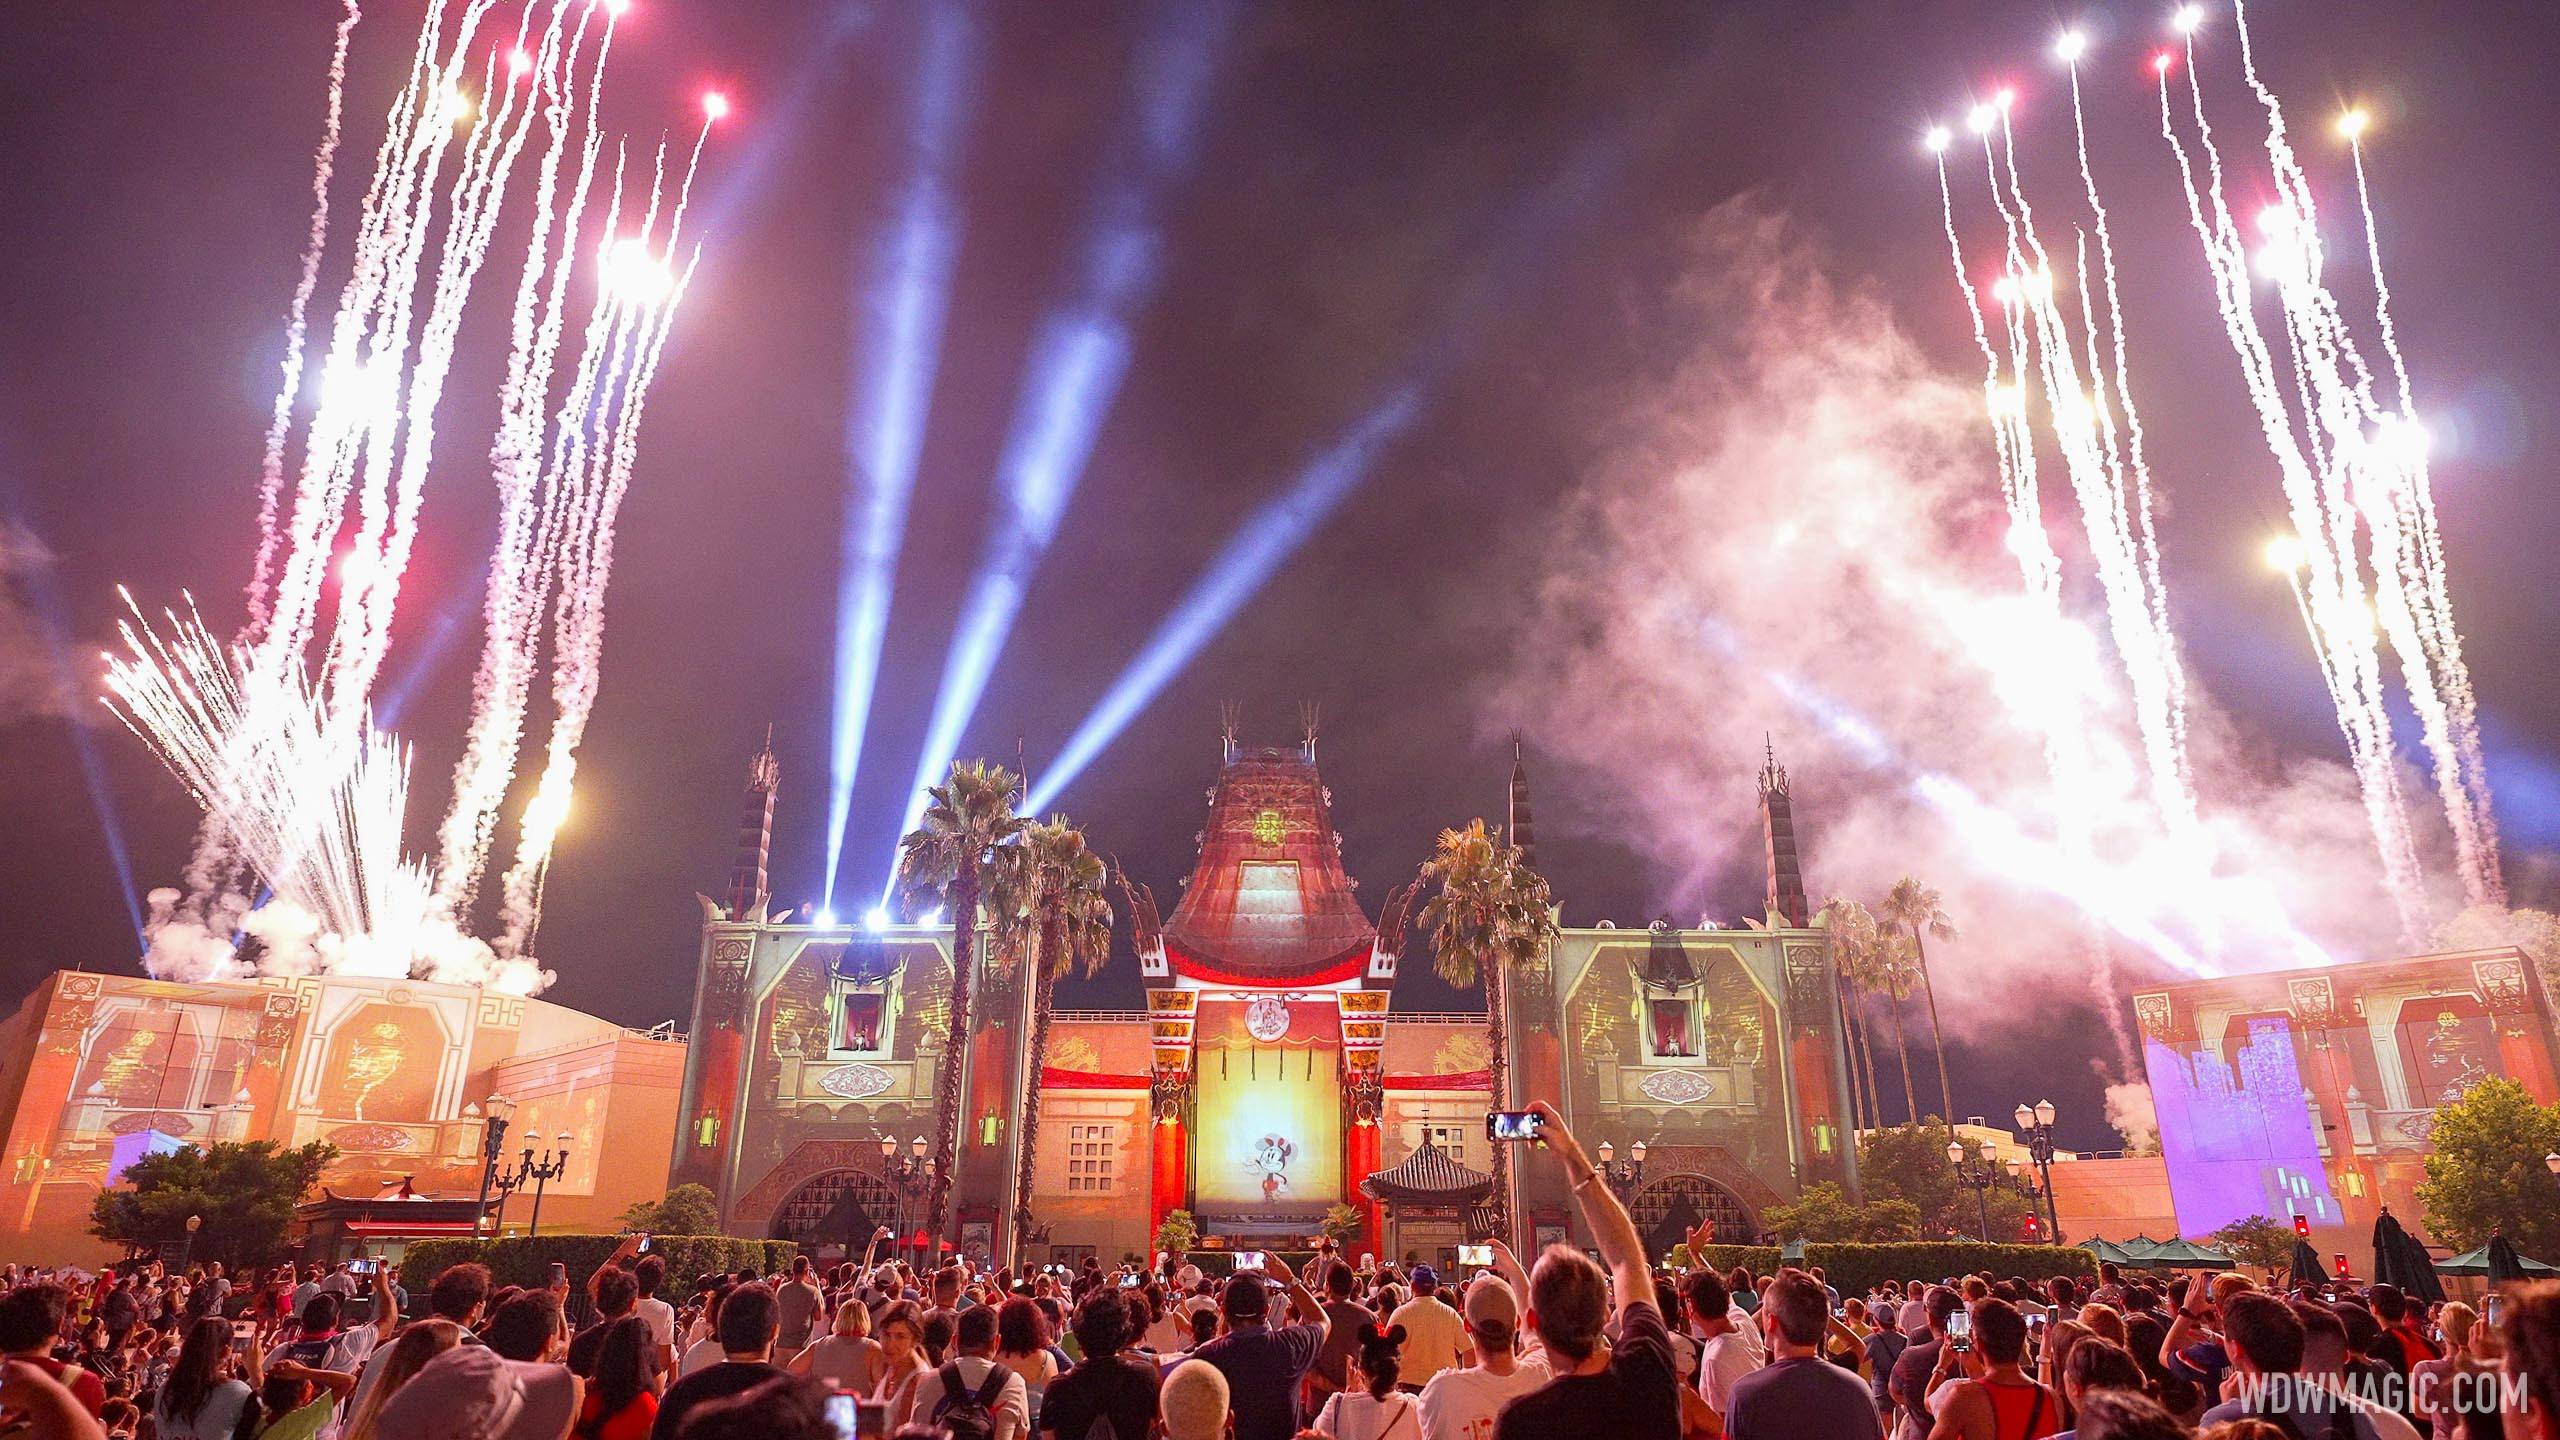 'Wonderful World of Animation' brings fireworks back to Disney's Hollywood Studios and includes news scenes from recent movies